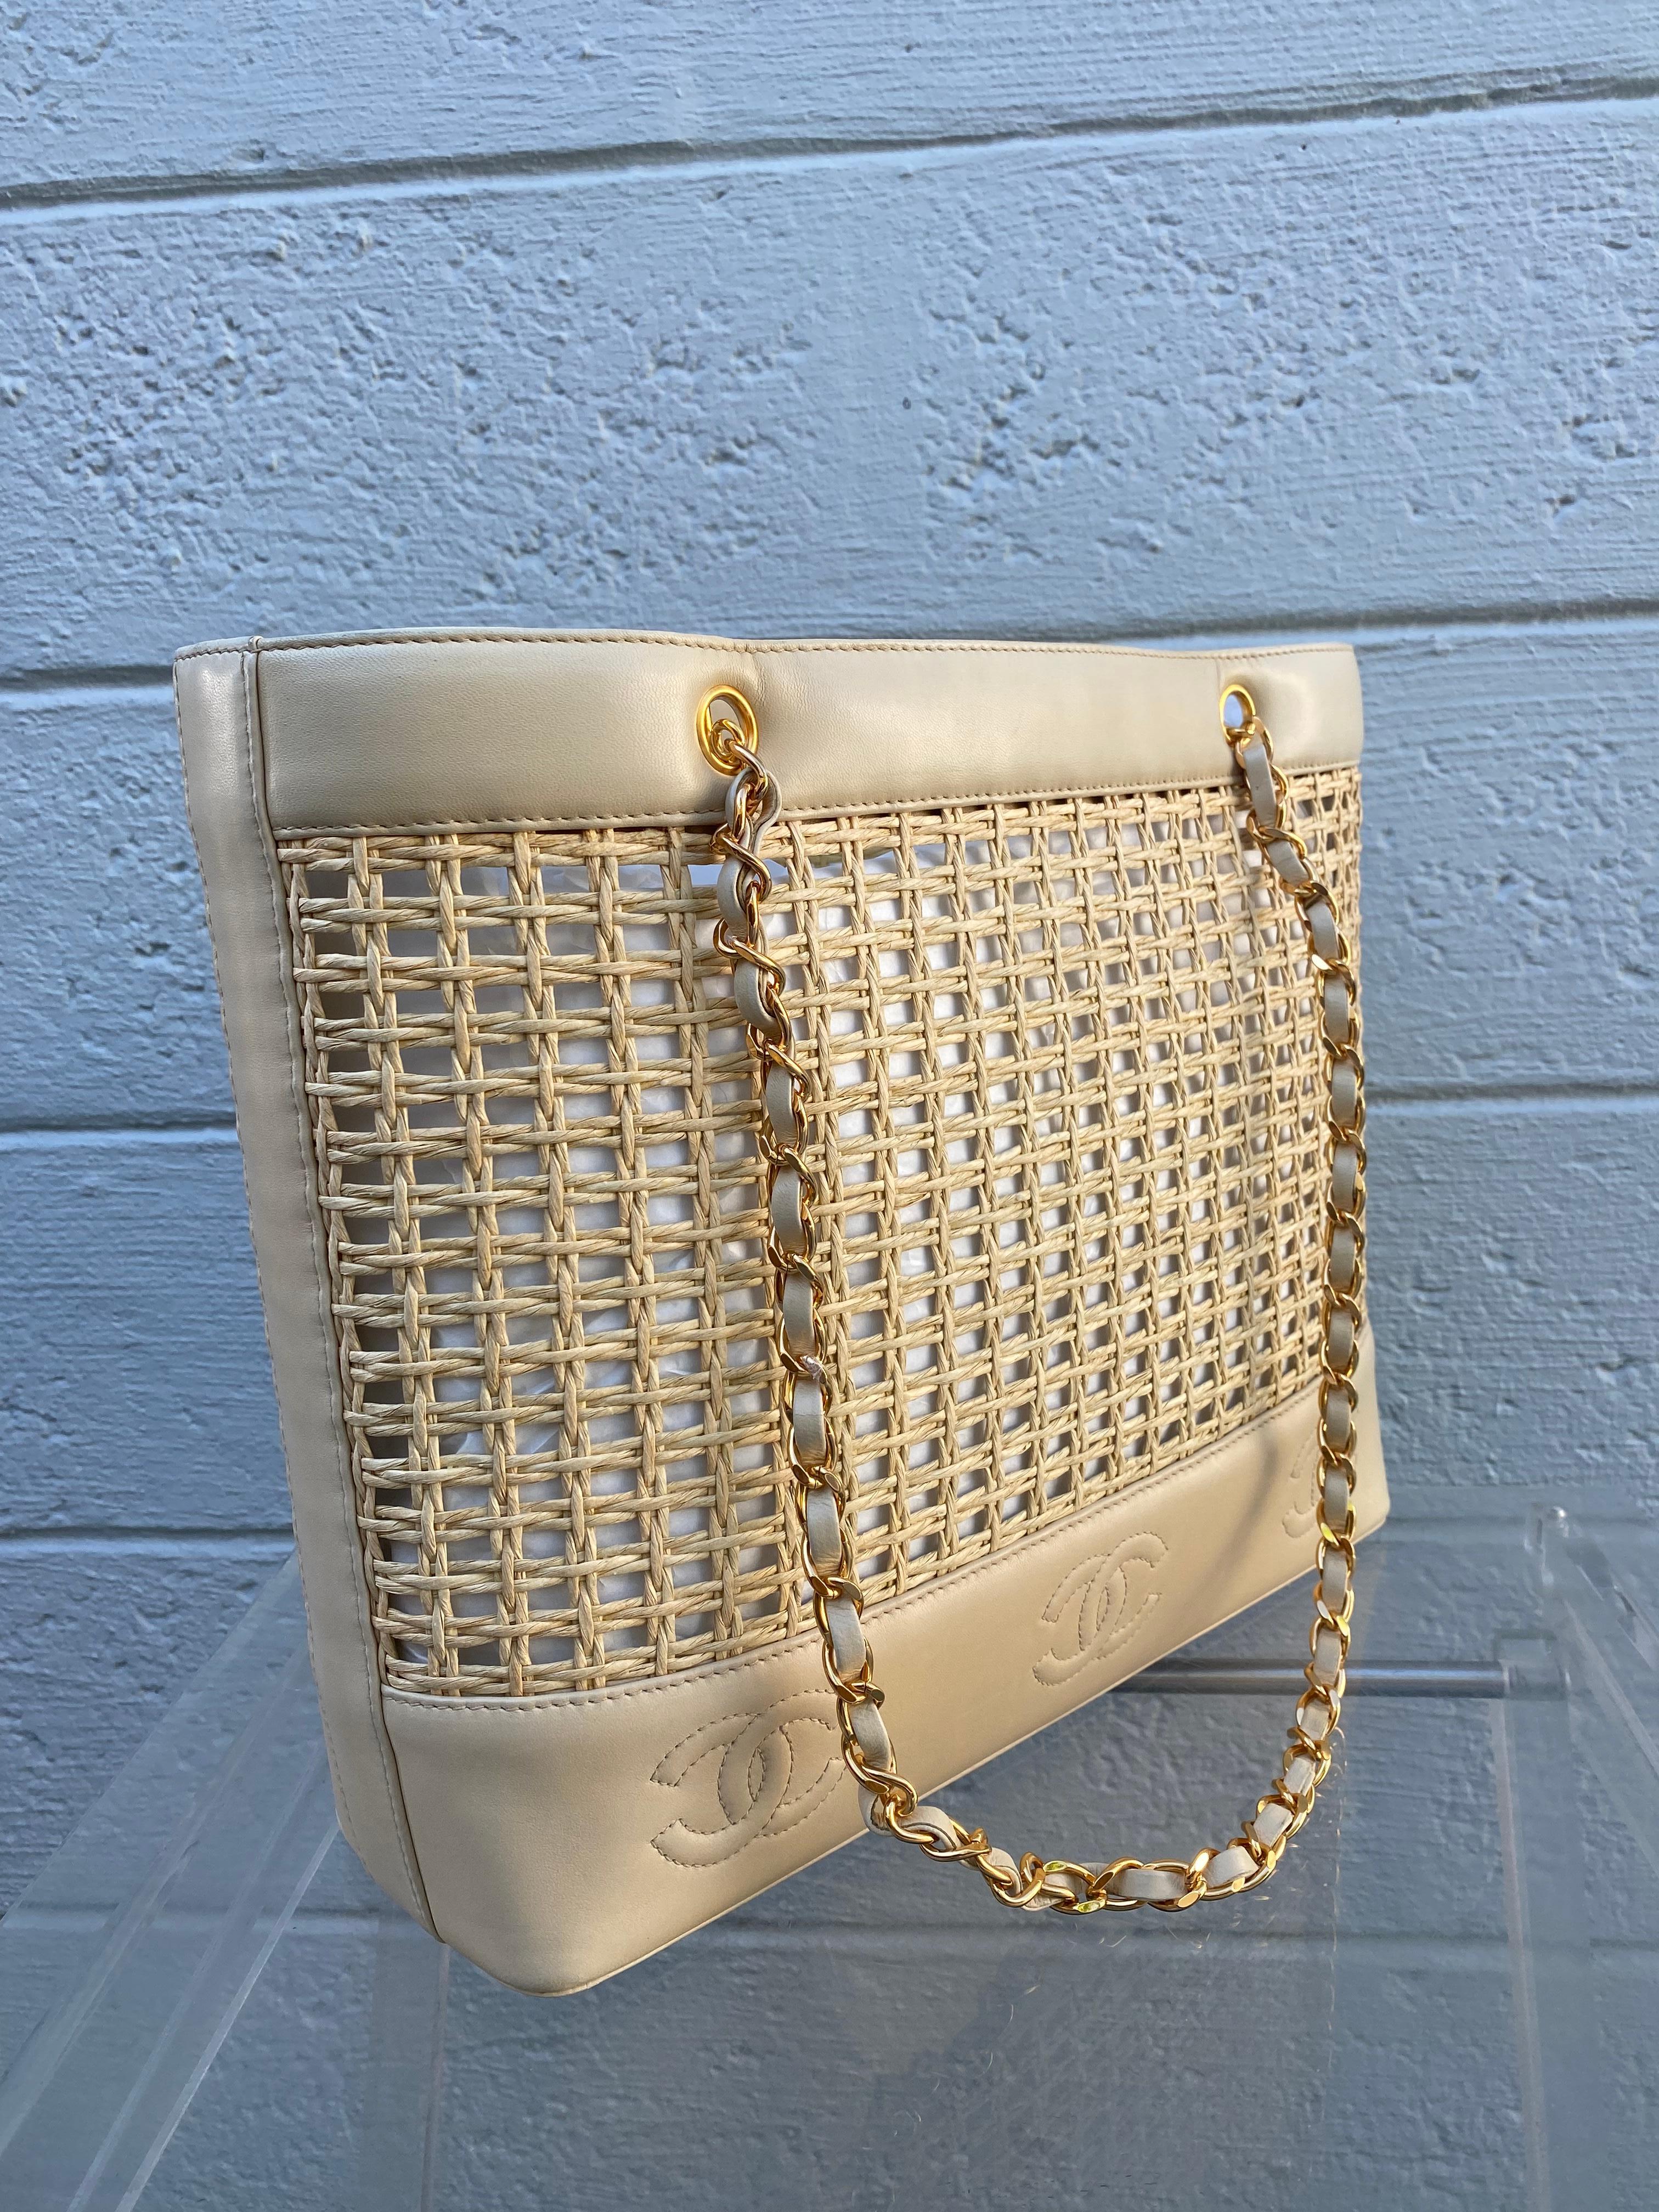 The ultimate in handbag making luxury craftsmanship. The Iconic House of Chanel always provides us with timeless and classic pieces. The rare bag takes timeless creation to a new level of sophistication and charm. Made from the finest materials that